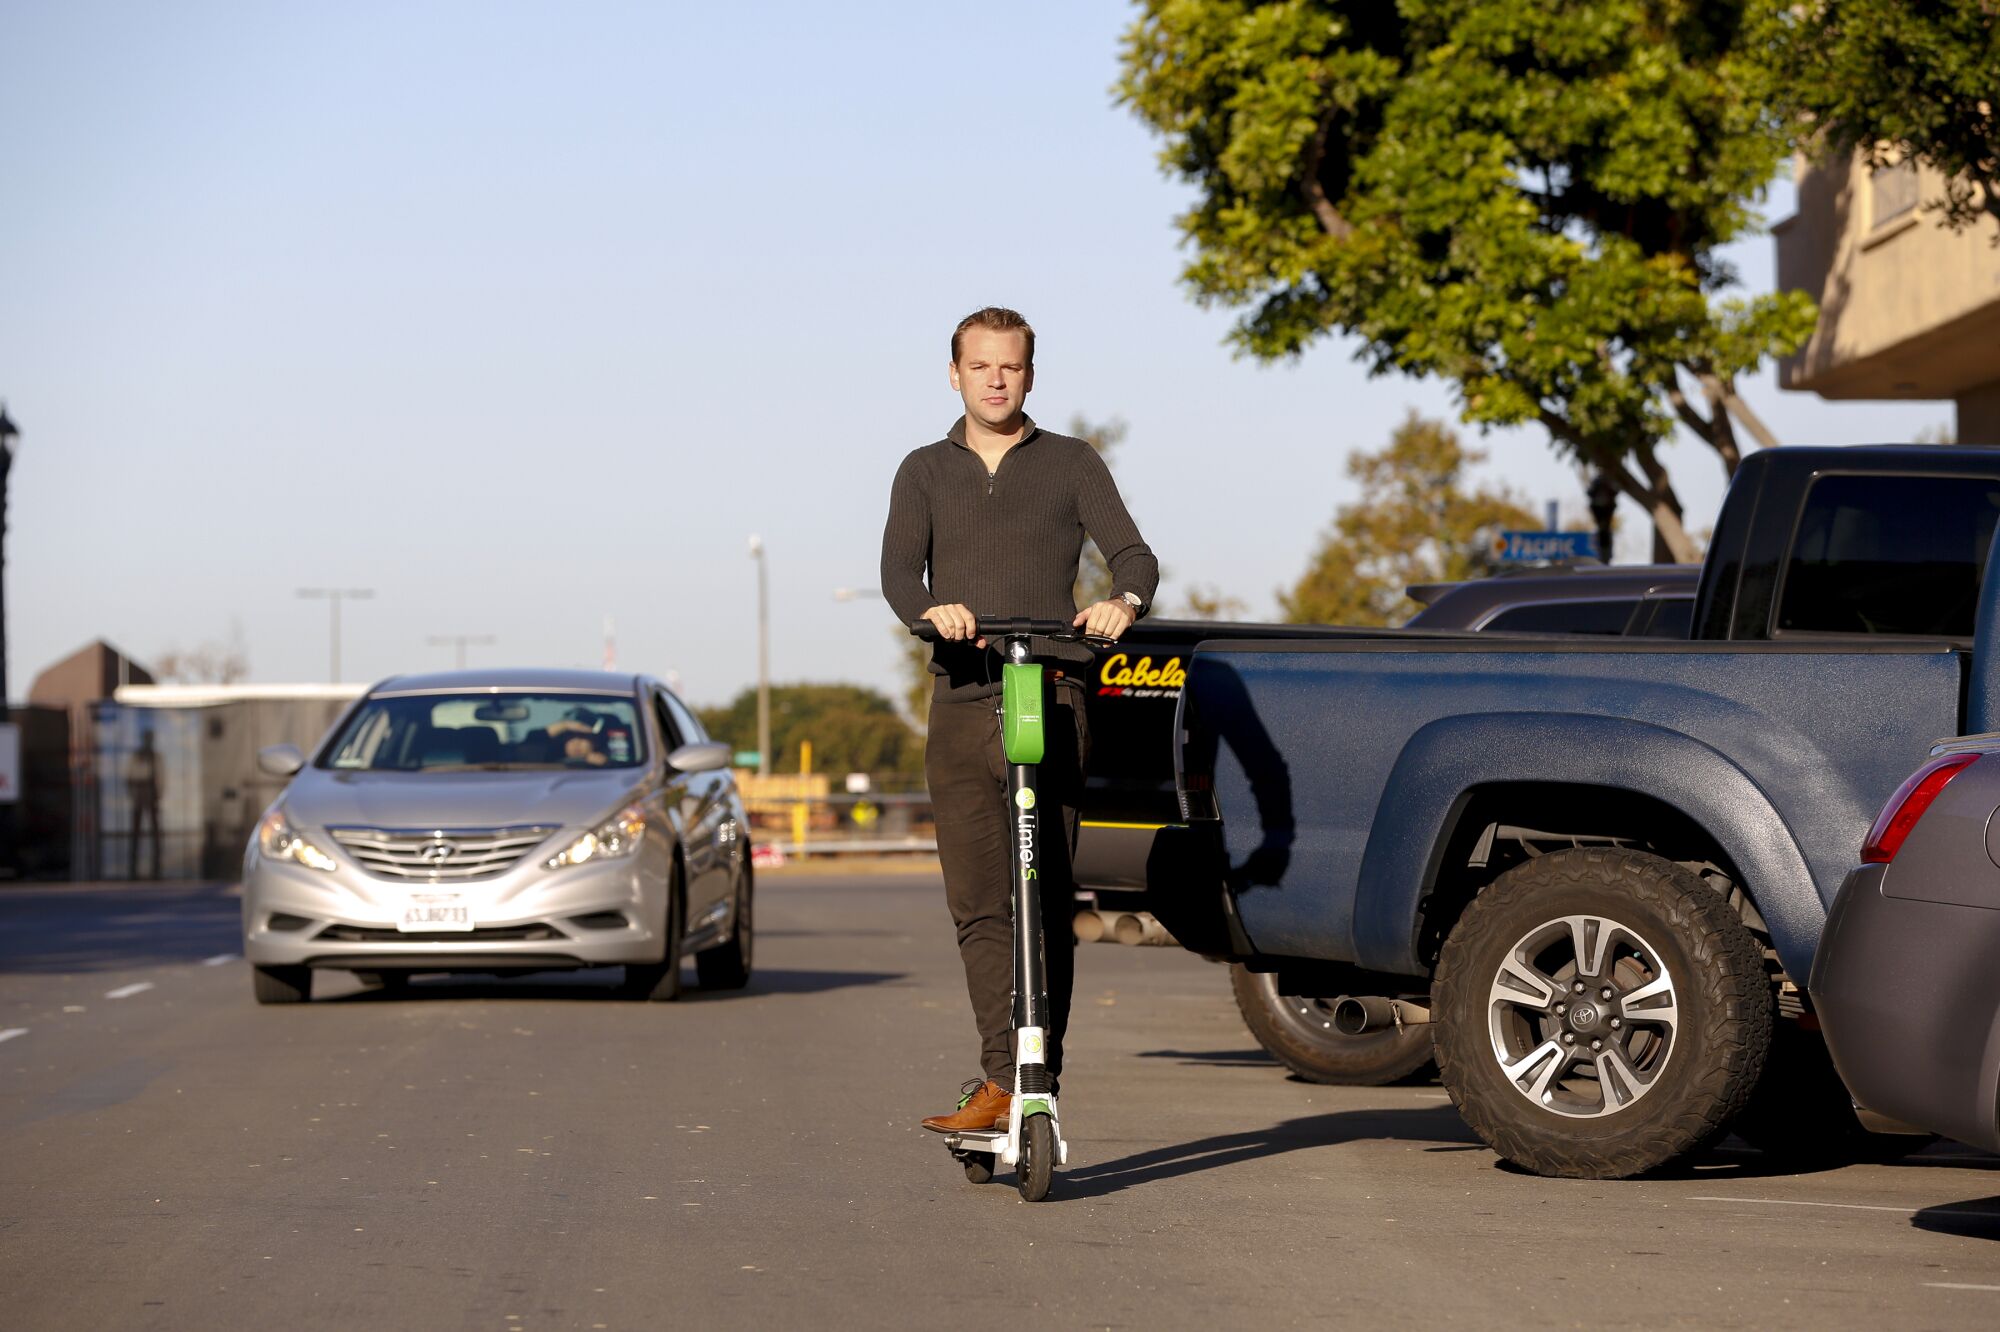 Justin Vaiciunas, who lives in downtown San Diego, figures he rides the scooters on average four times a day.